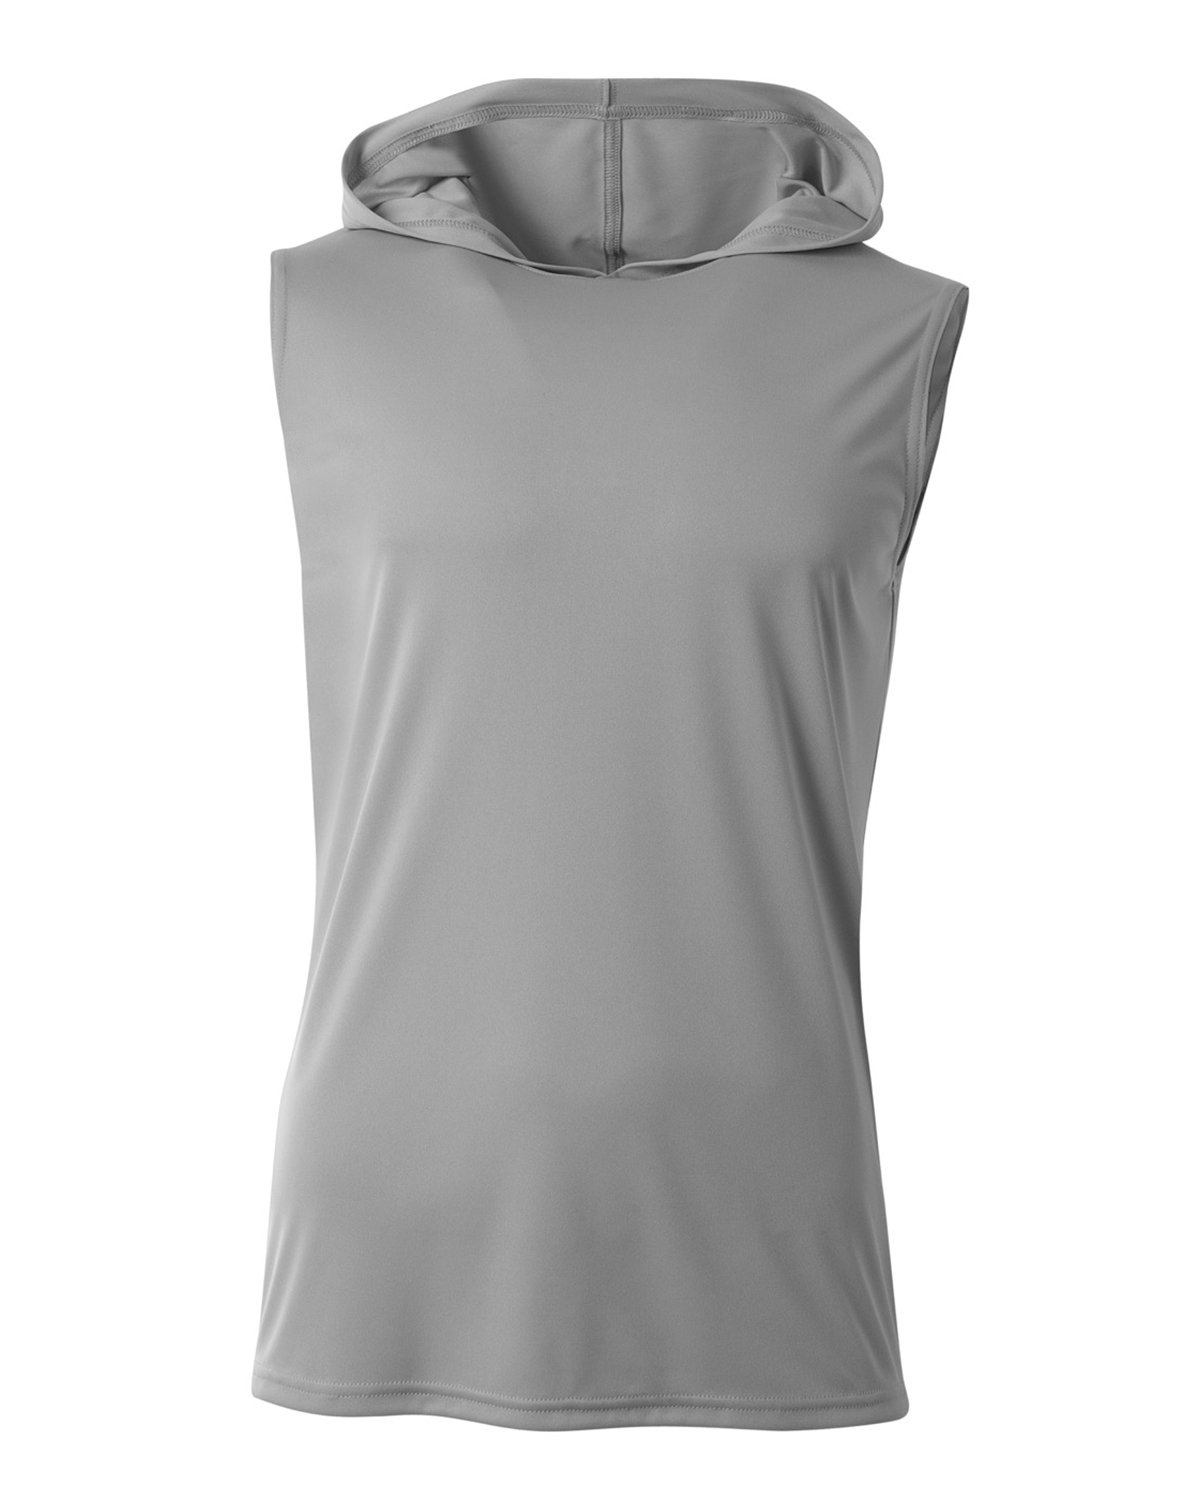 A4 N3410 - Men's Cooling Performance Sleeveless Hooded T-Shirt